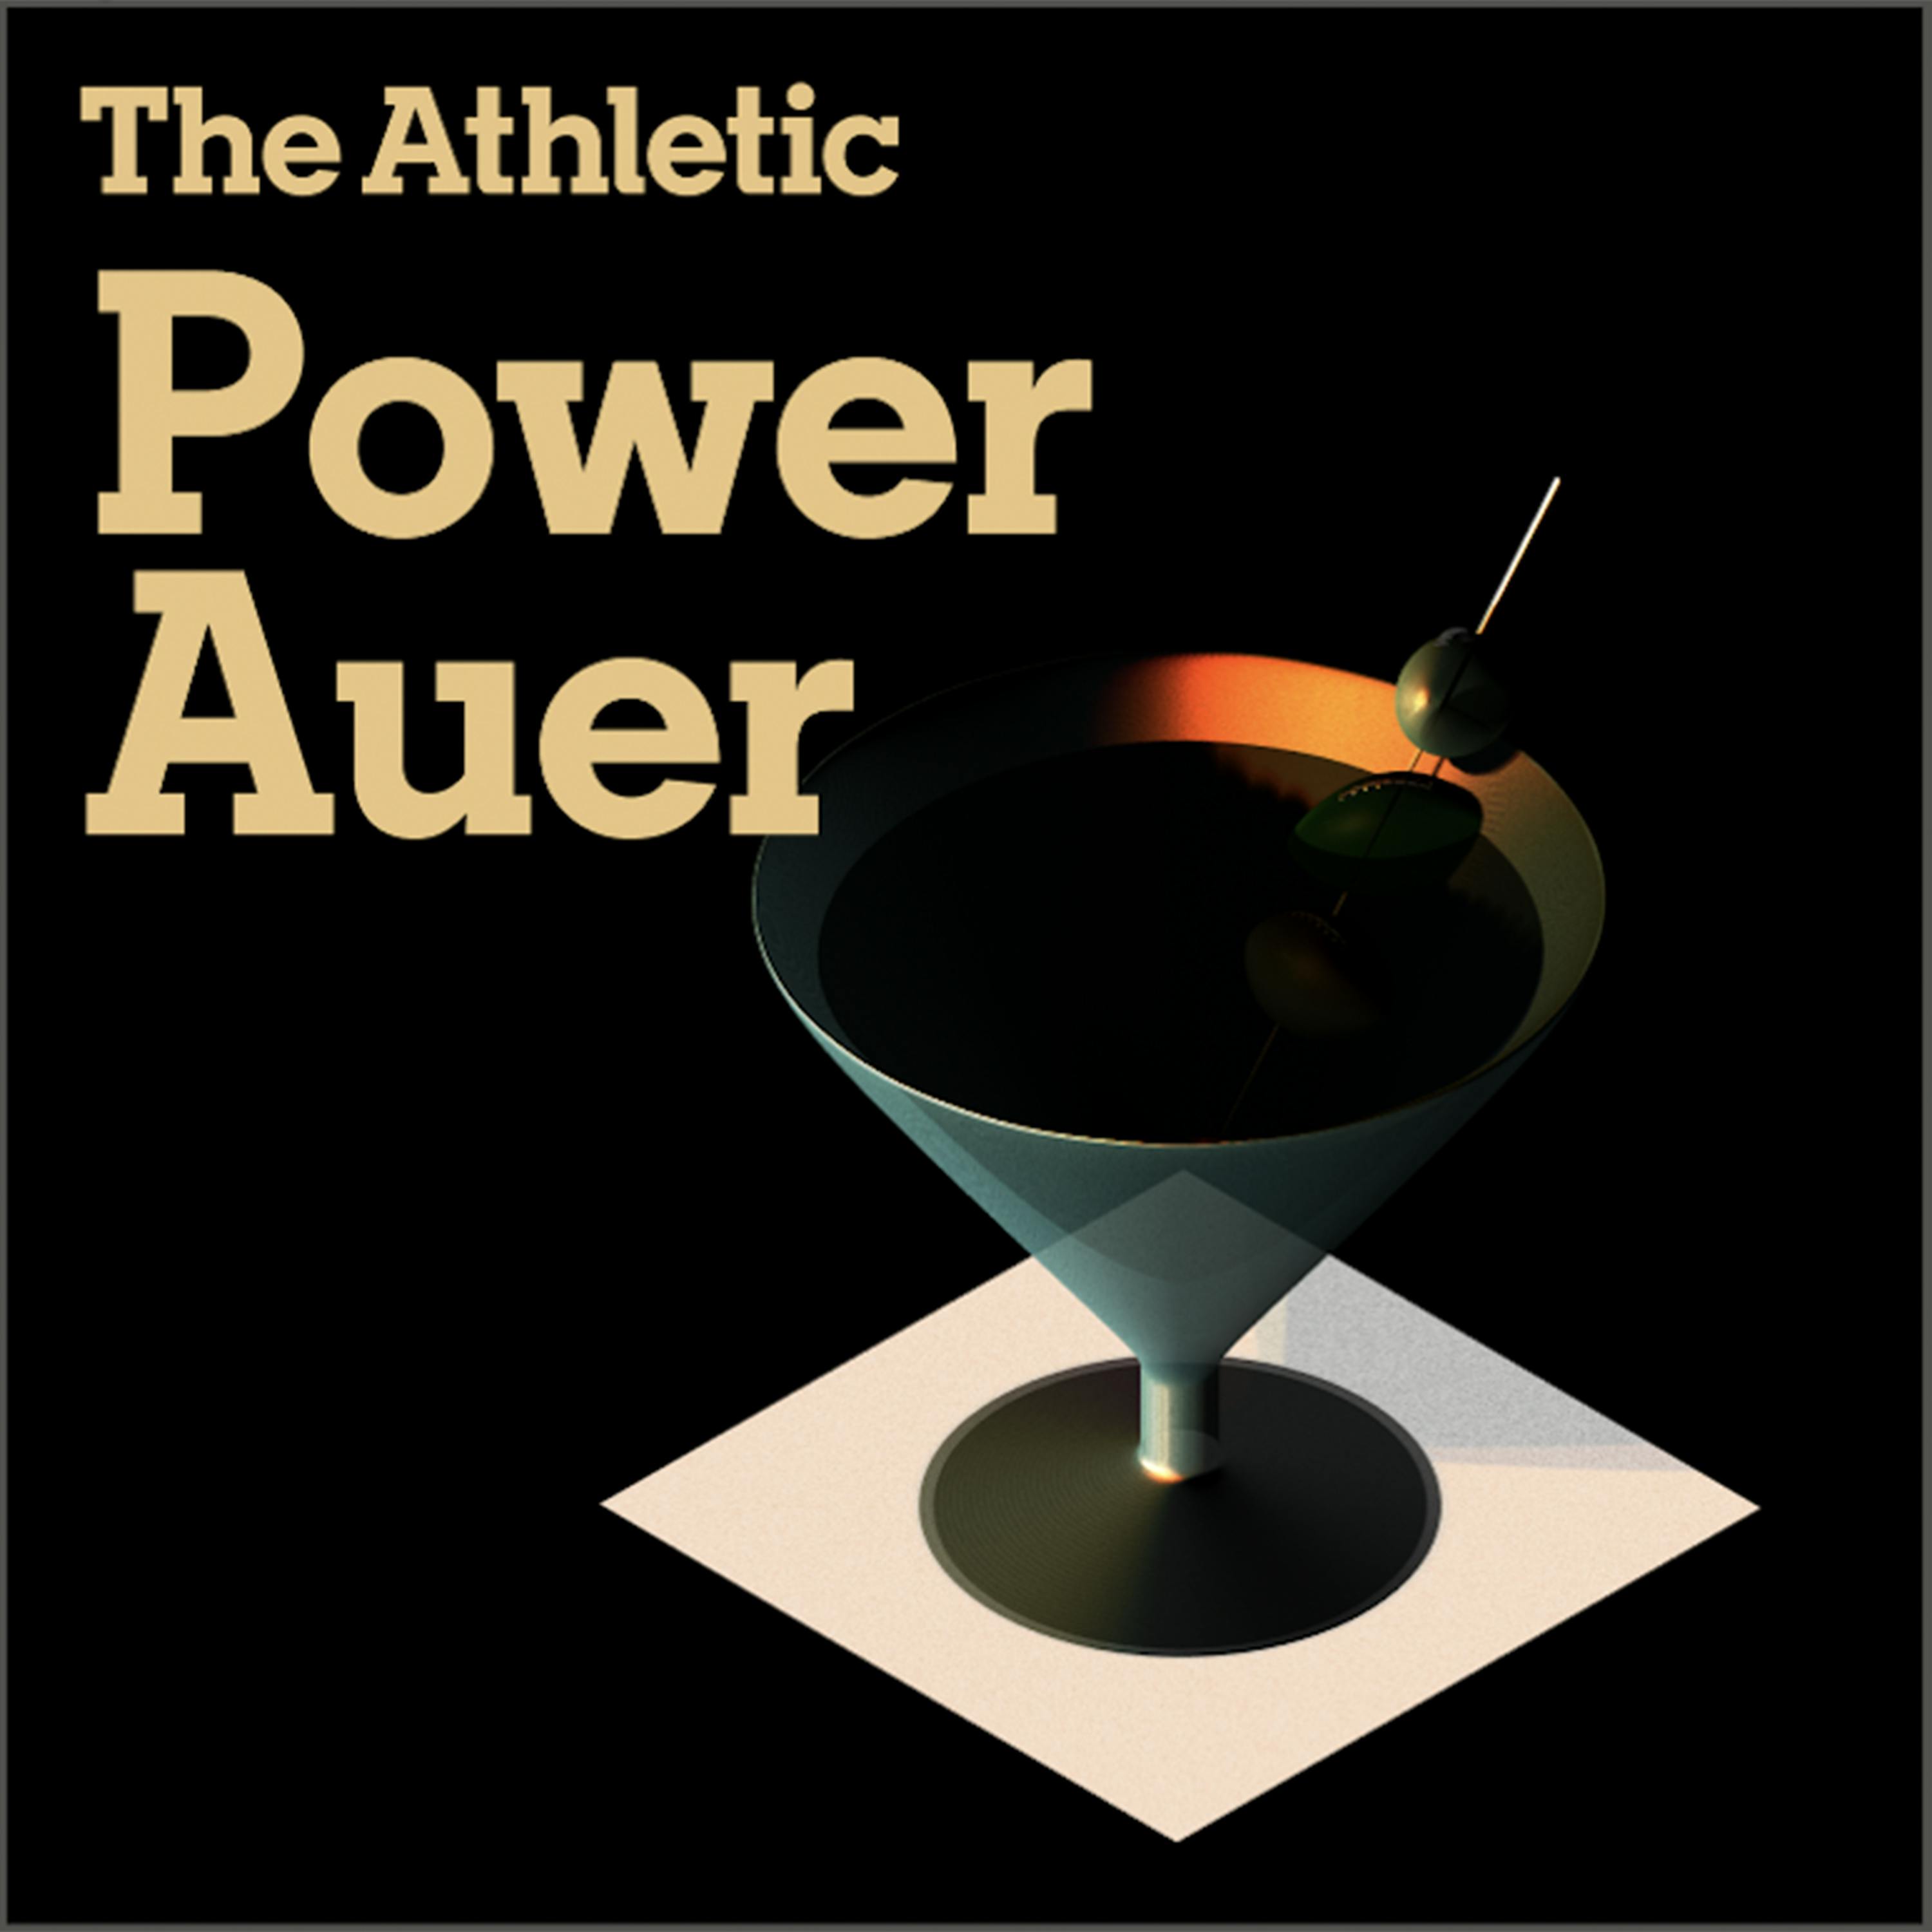 ”They’re all a problem”: Chip Kelly sounds off + FSU’s future & the greatest Famous Toastery Bowl ever | Power Auer